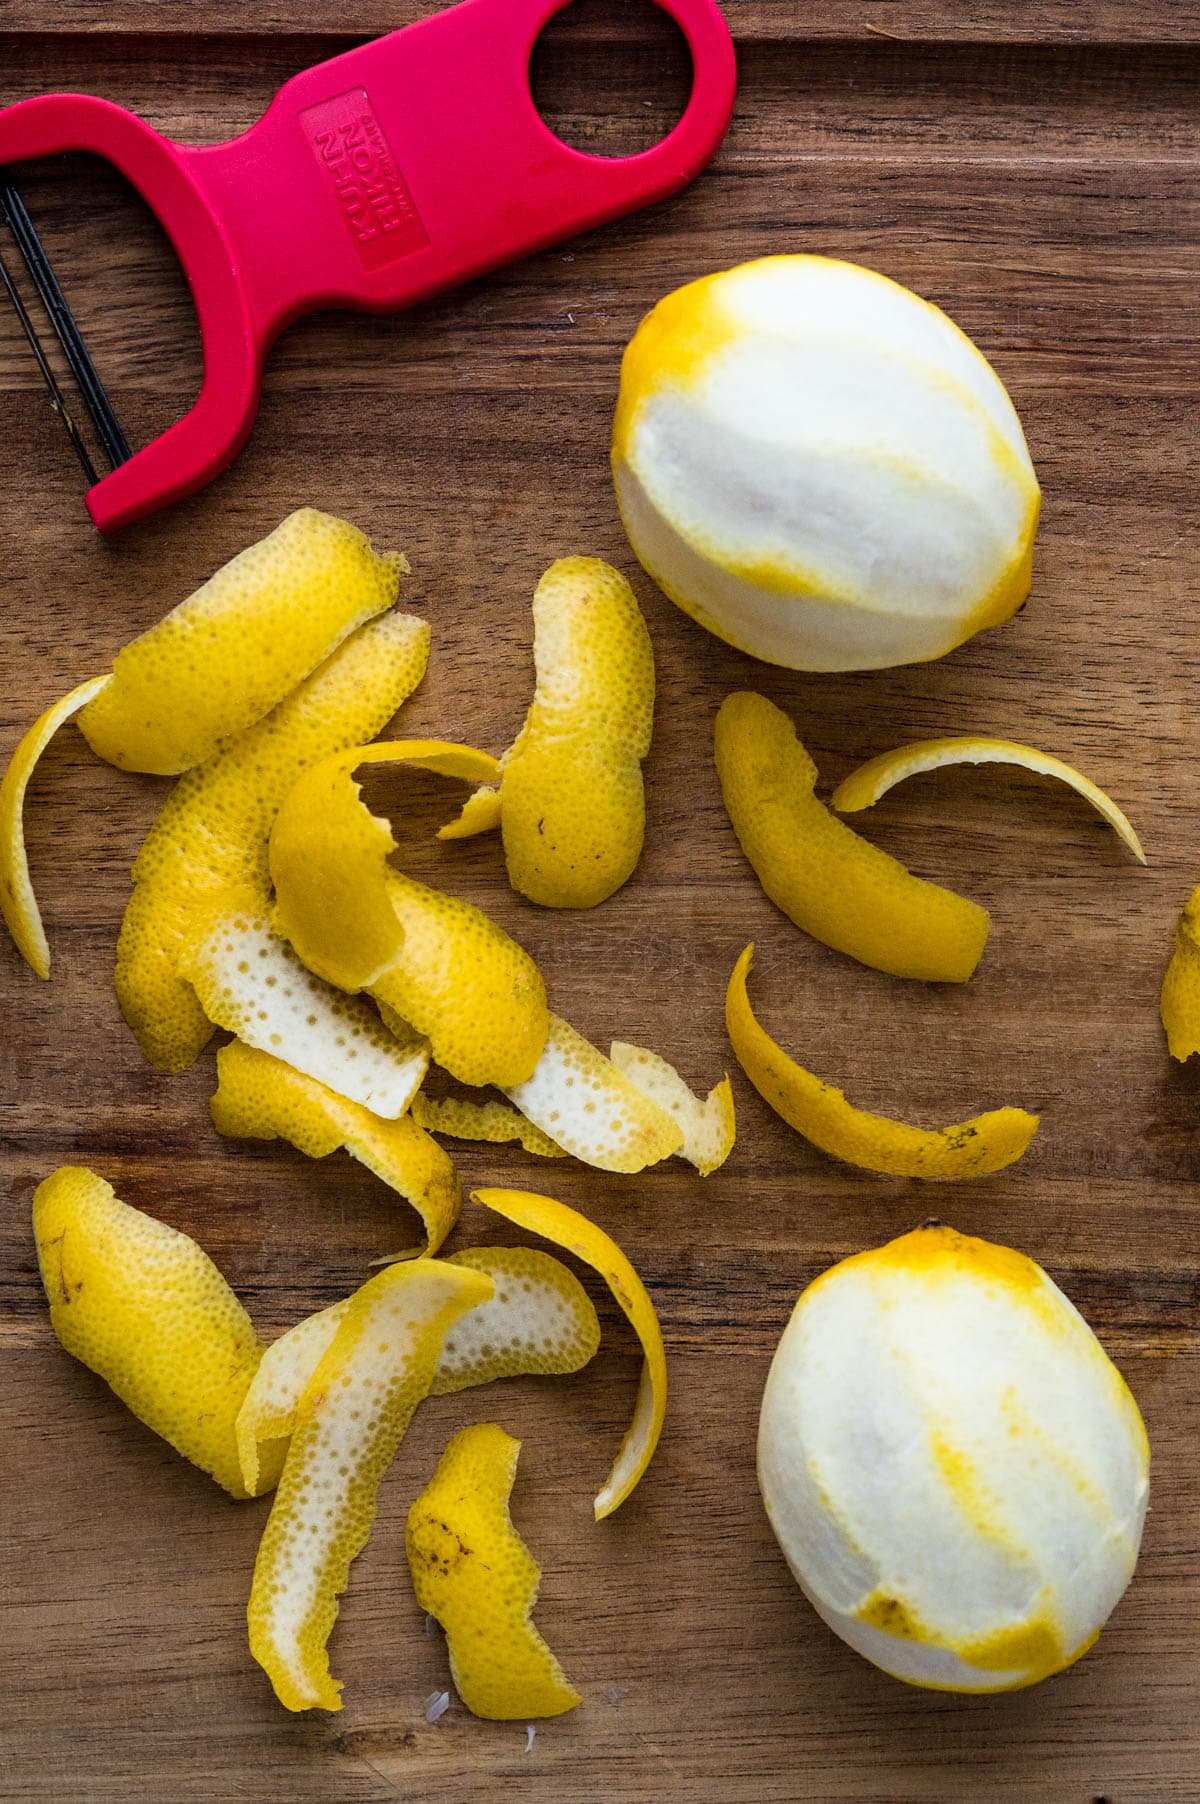 Using a vegetable peeler to remove strips of lemon zest from the fruit.